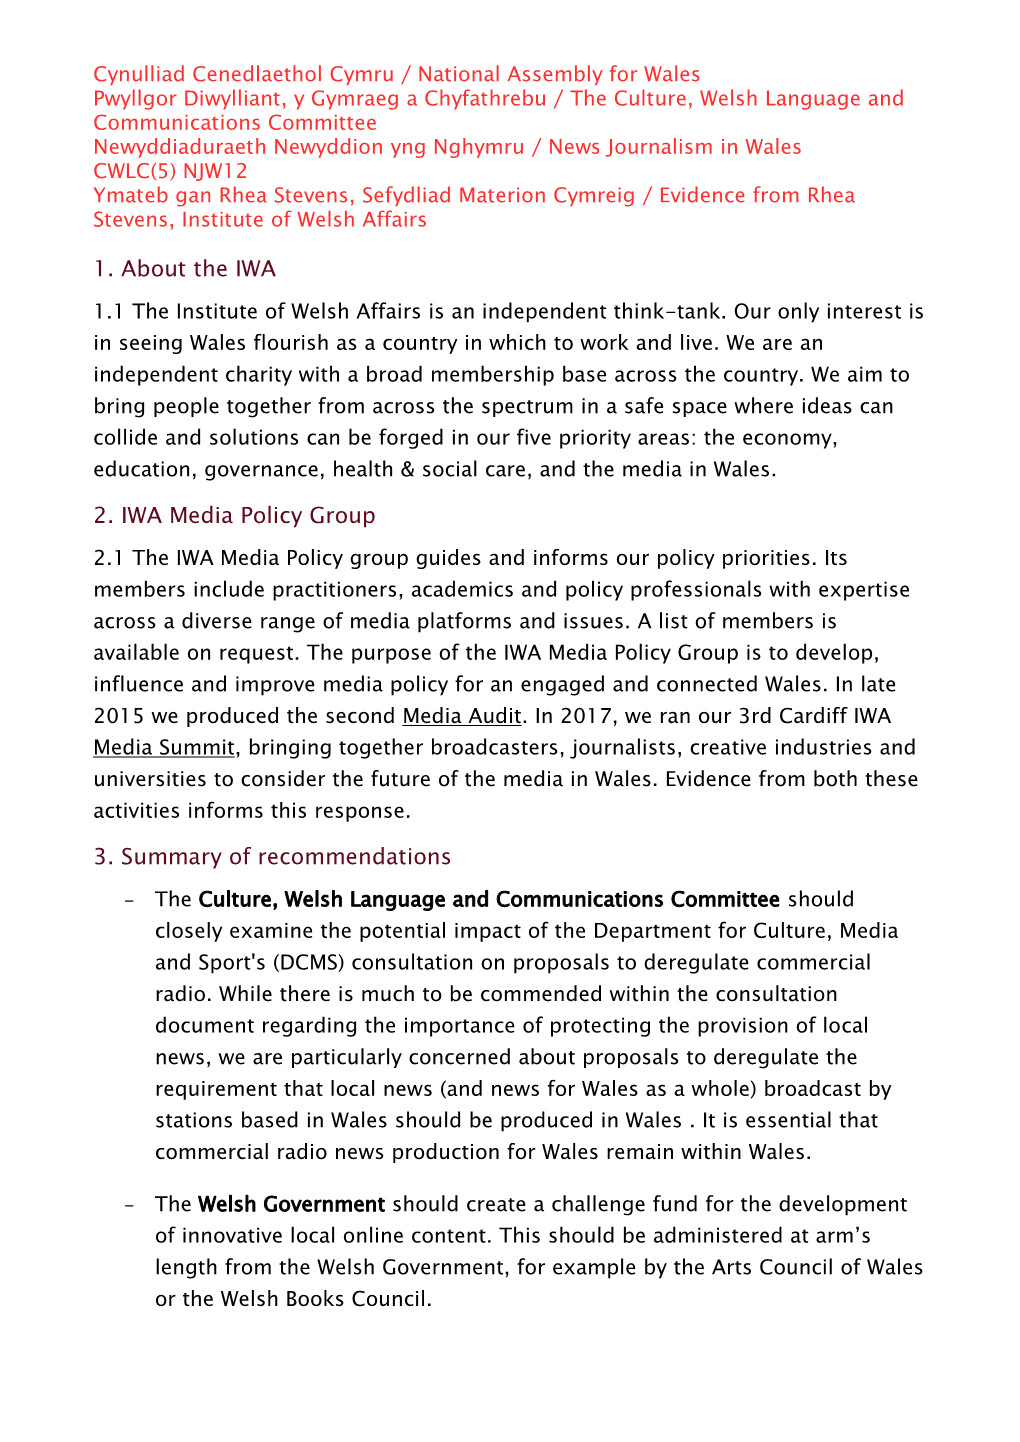 1. About the IWA 2. IWA Media Policy Group 3. Summary Of